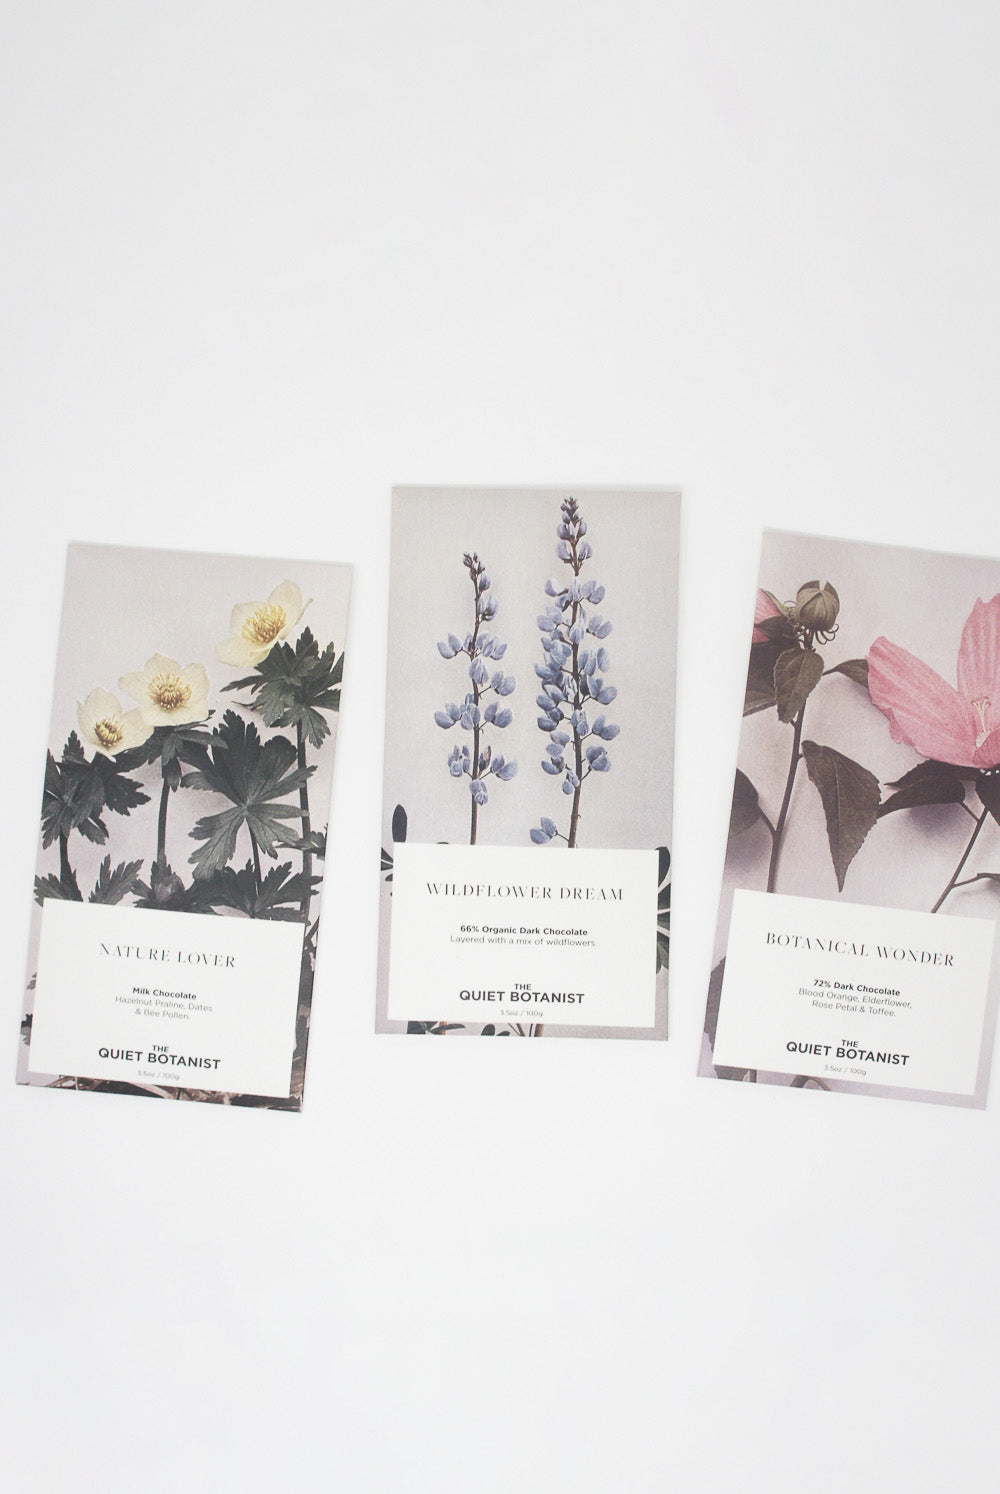 A set of three Wildflower Dream Bar cards by The Quiet Botanist.